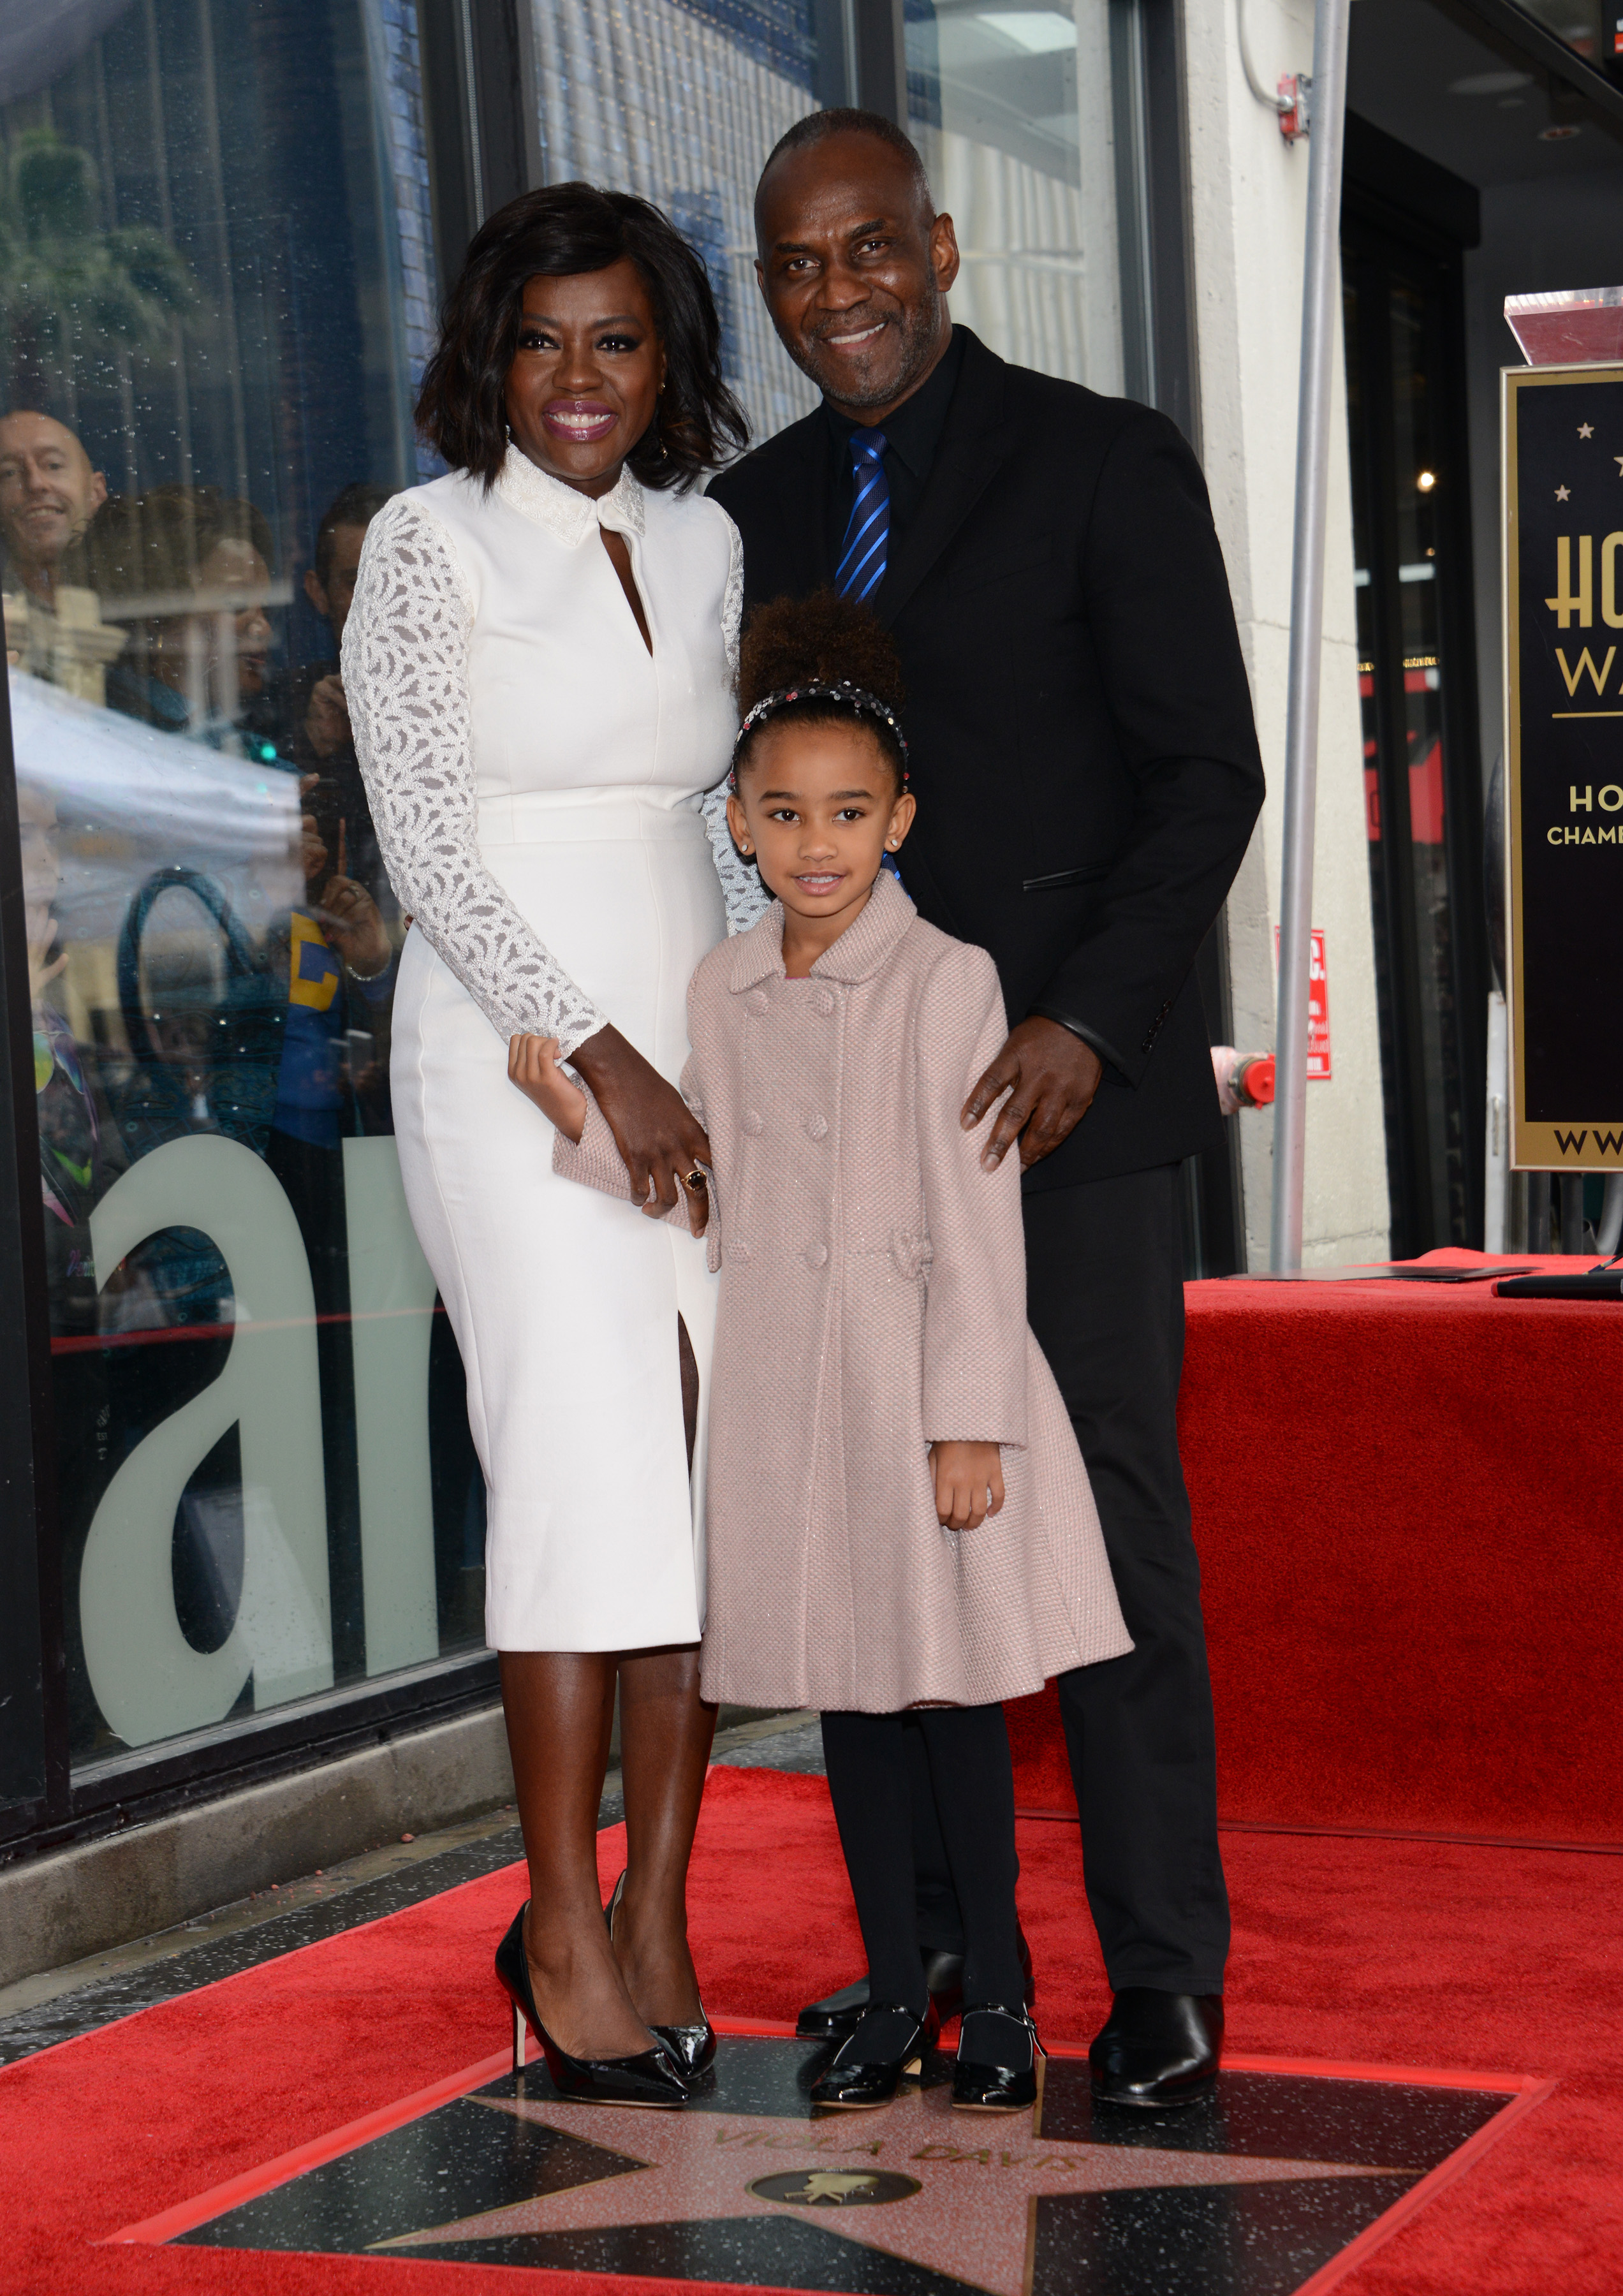 Viola Davis, Genesis, and Julius Tennon at Viola Davis' Hollywood Walk of Fame star ceremony in Hollywood, California on January 5, 2017 | Source: Getty Images